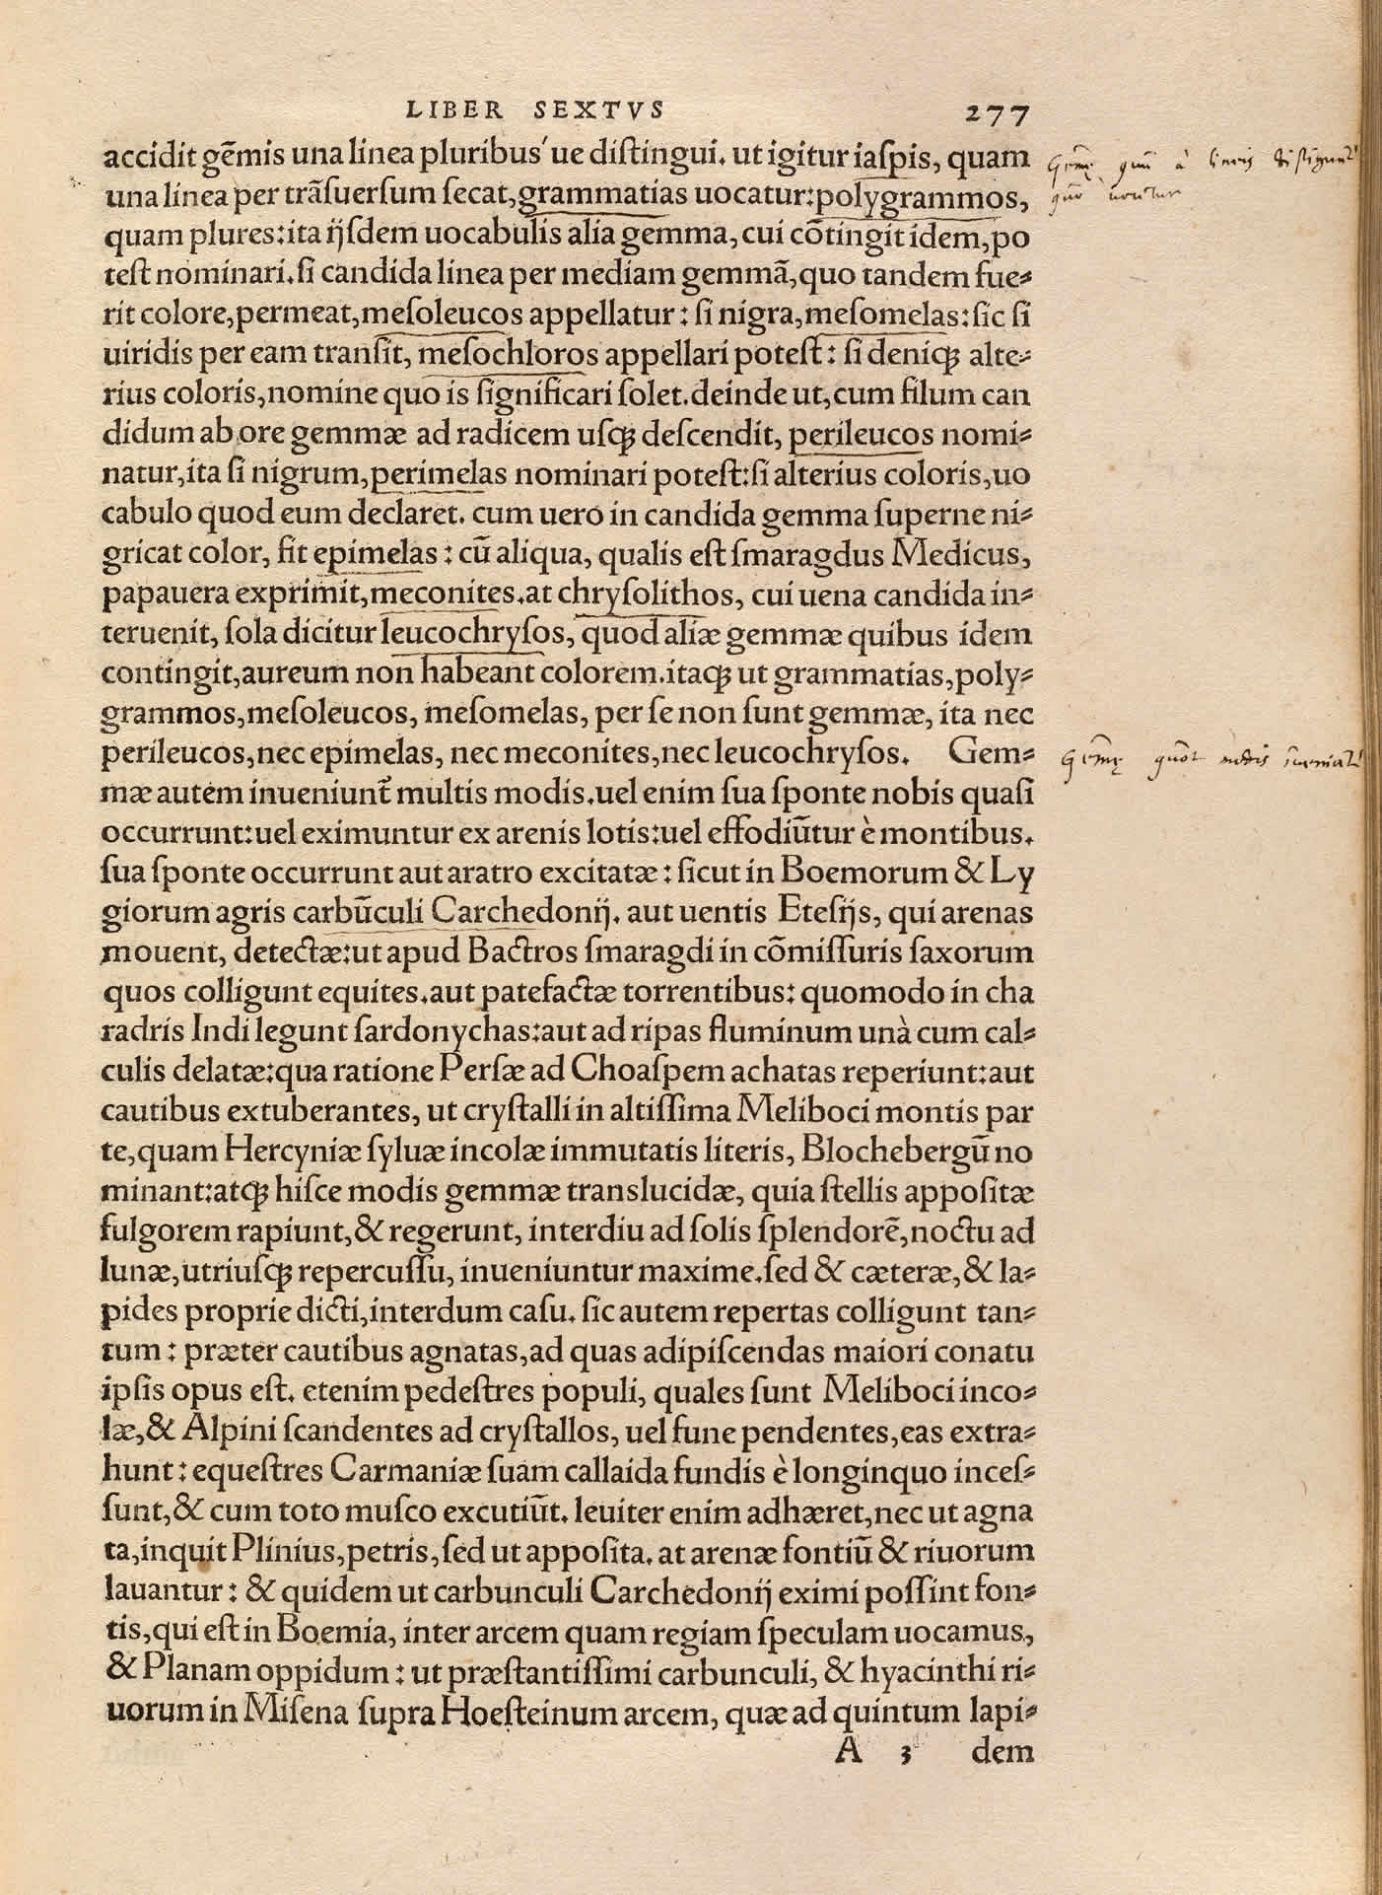 Image 3 from GEORG AGRICOLA (1494 - 1555). De Ortu et Causis Subterraneorum [and other works]. Basel: Hieronymus Frobenius and Nikolaus Episcopius, 1546.